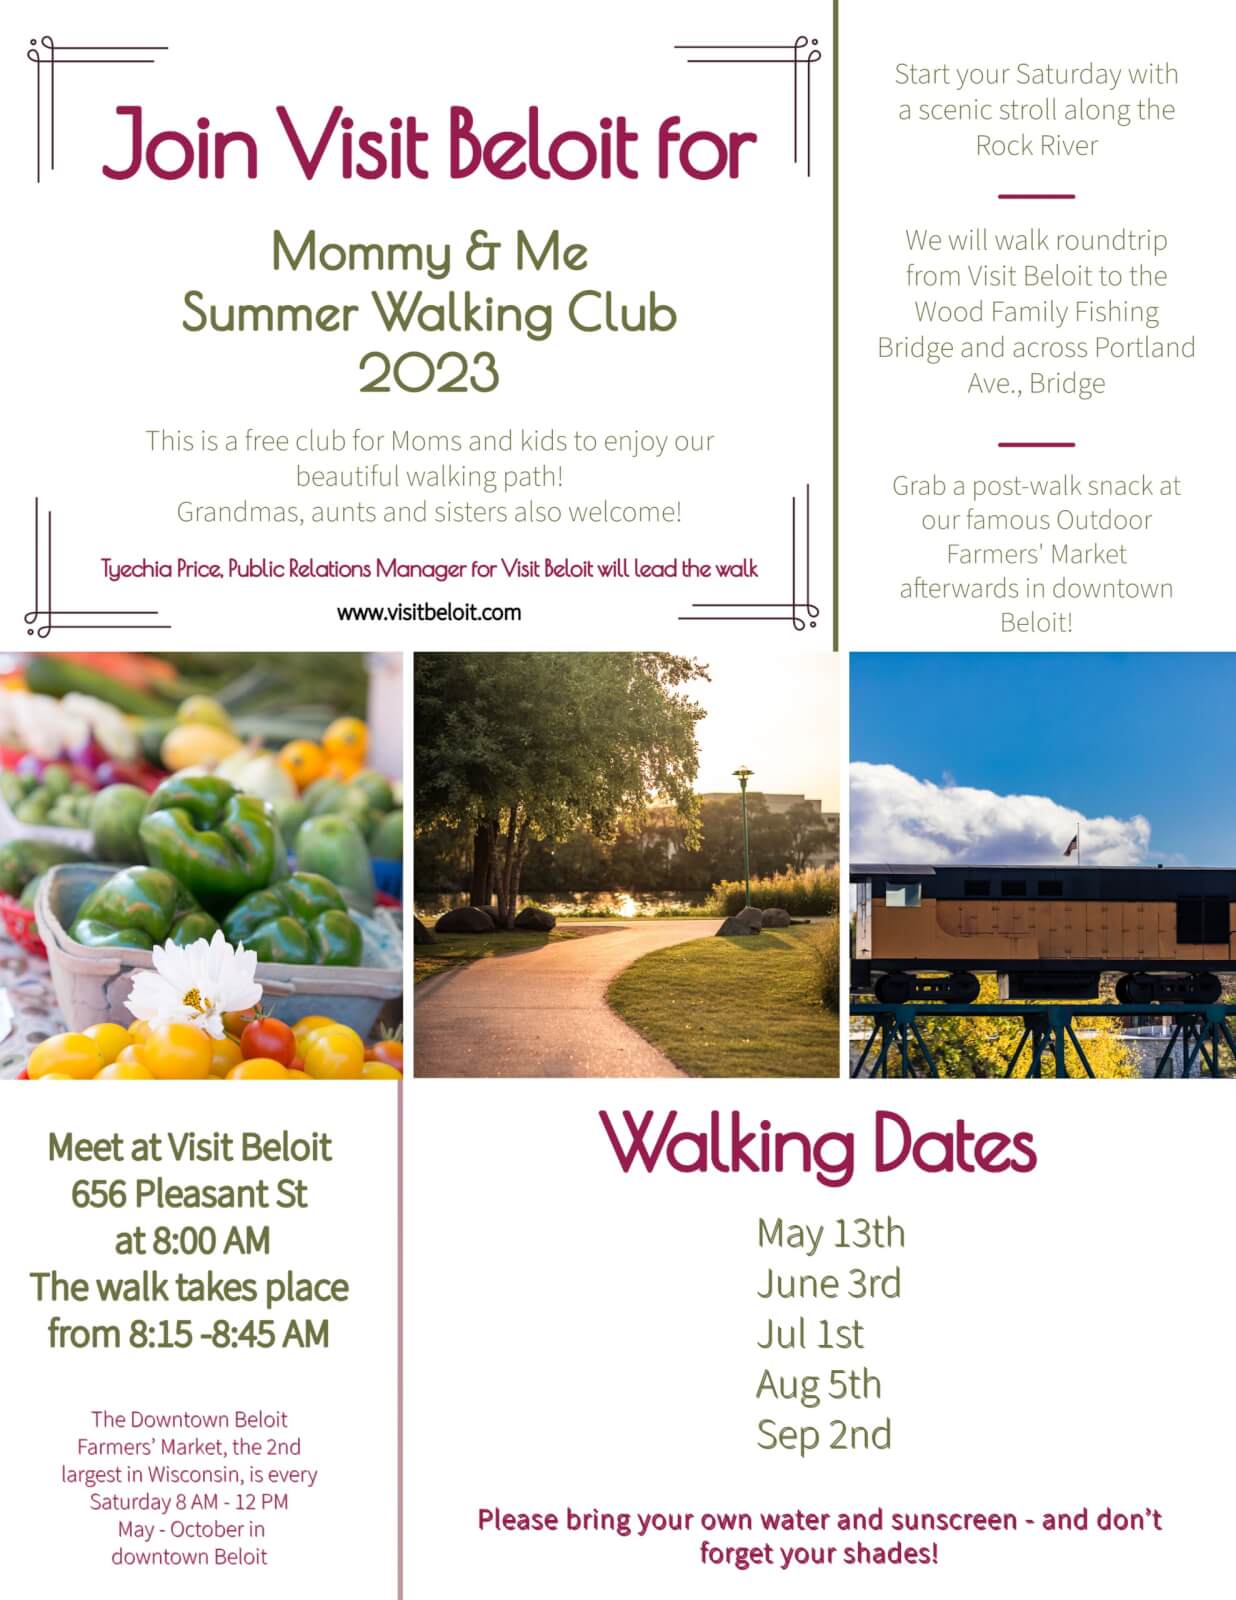 Mommy and Me Summer Walking Club 2023